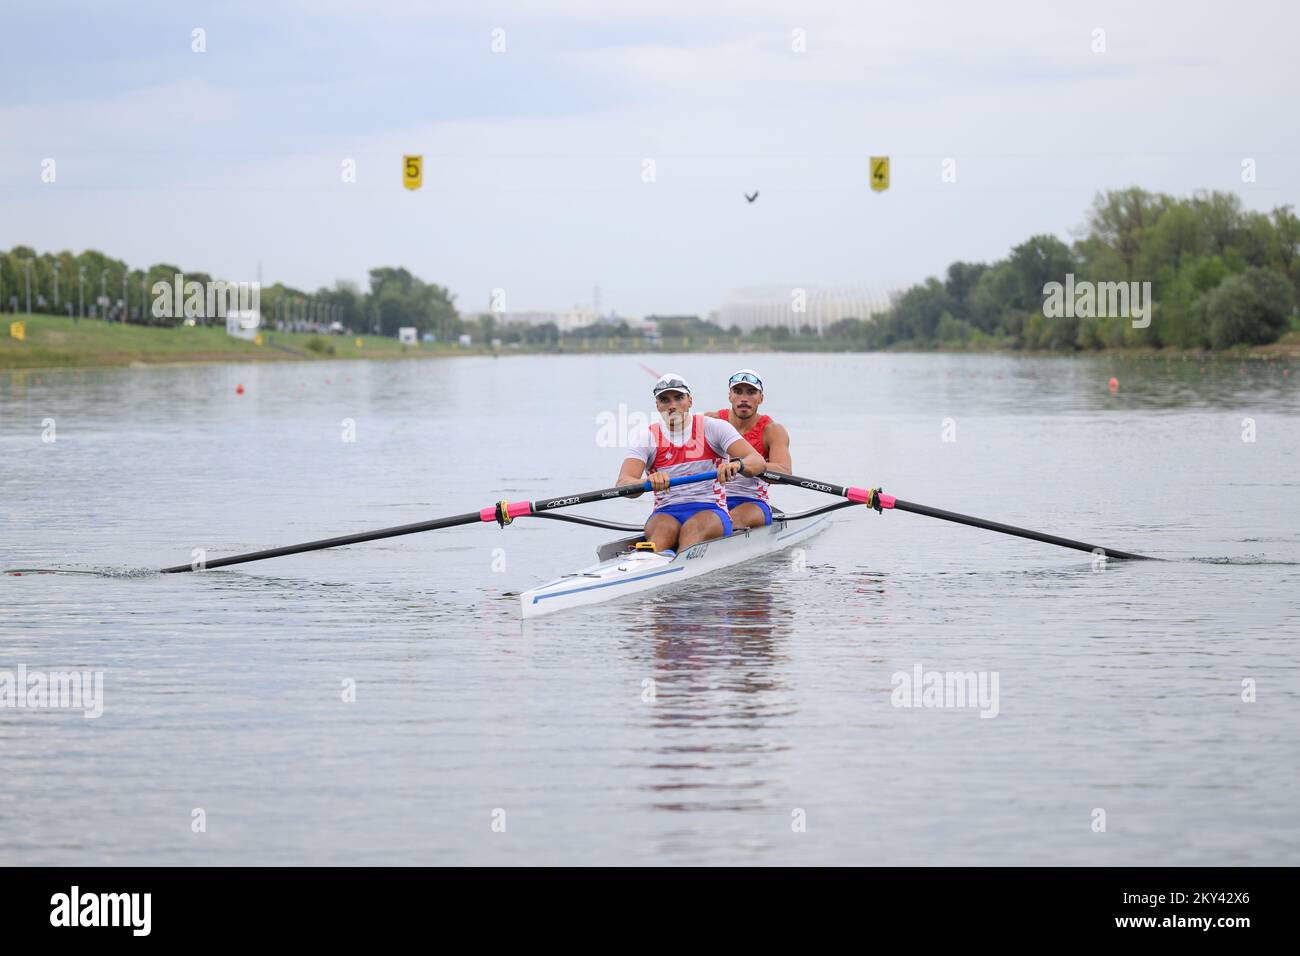 Croatian rowers Patrik Loncaric and Anton Loncaric during Media day at Jarun Lake before departure on World rowing Championships, in Zagreb, Croatia, on September 15, 2022.The 2022 World rowing Championships will take place 18-25 September, 2022 in Racice, Czech Republic. Photo: Davor Puklavec/PIXSELL  Stock Photo